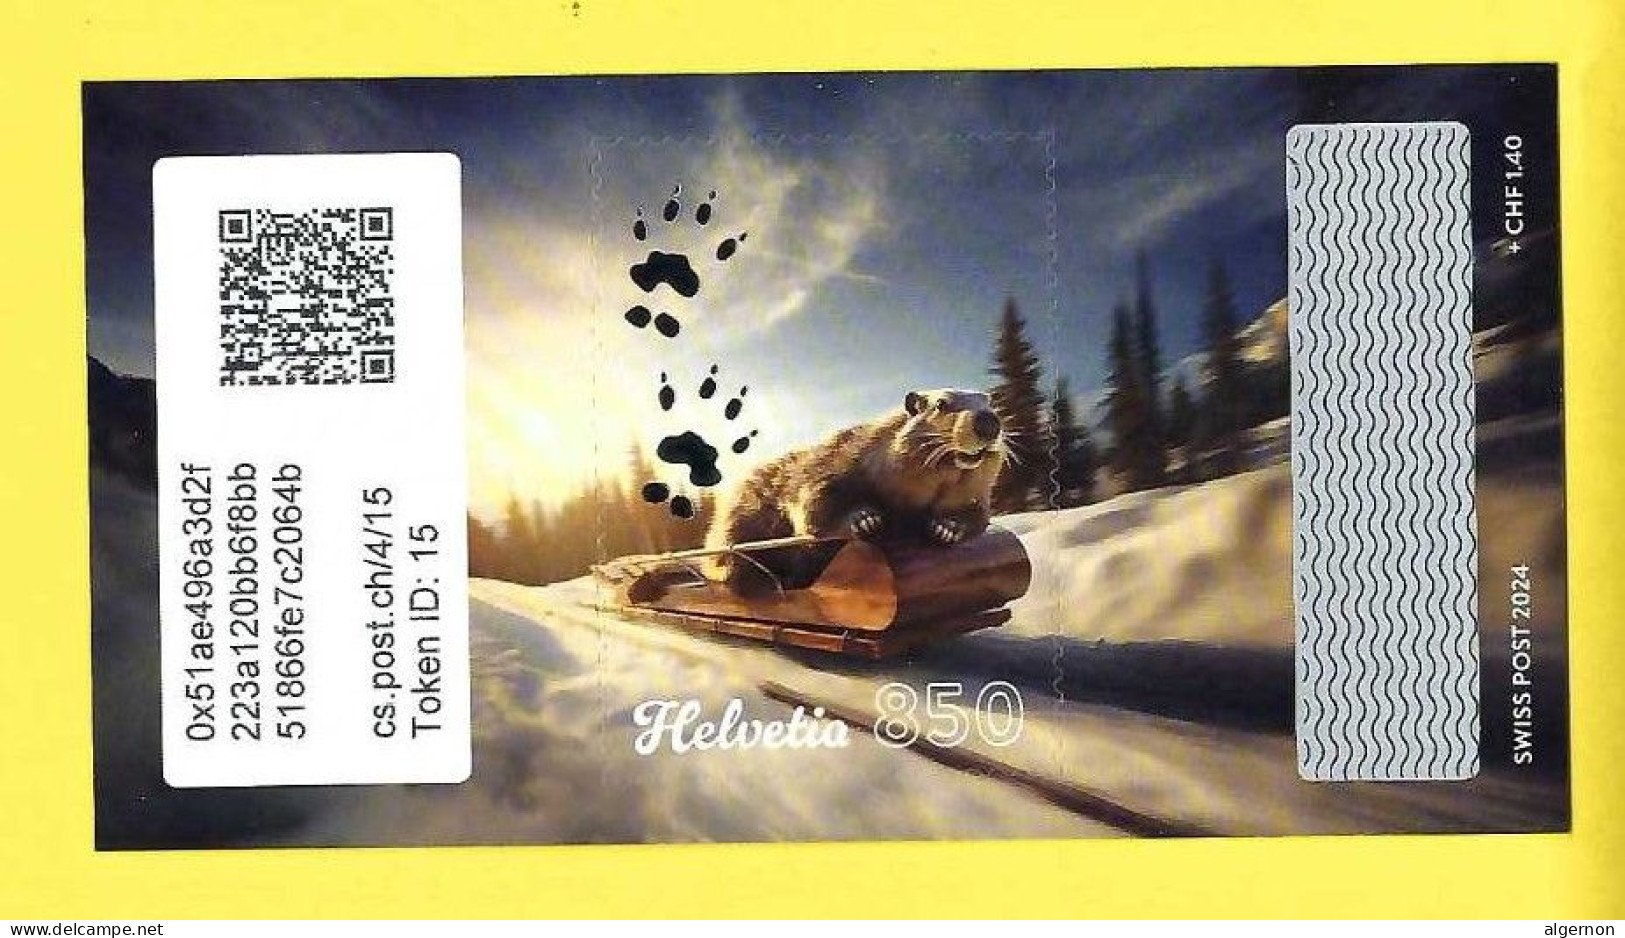 2024 Swiss Crypto Stamp 4.0 - ID 15  ** Marmotte Sledging Luge Tirage 7500 Exemplaires ! - Nuevos